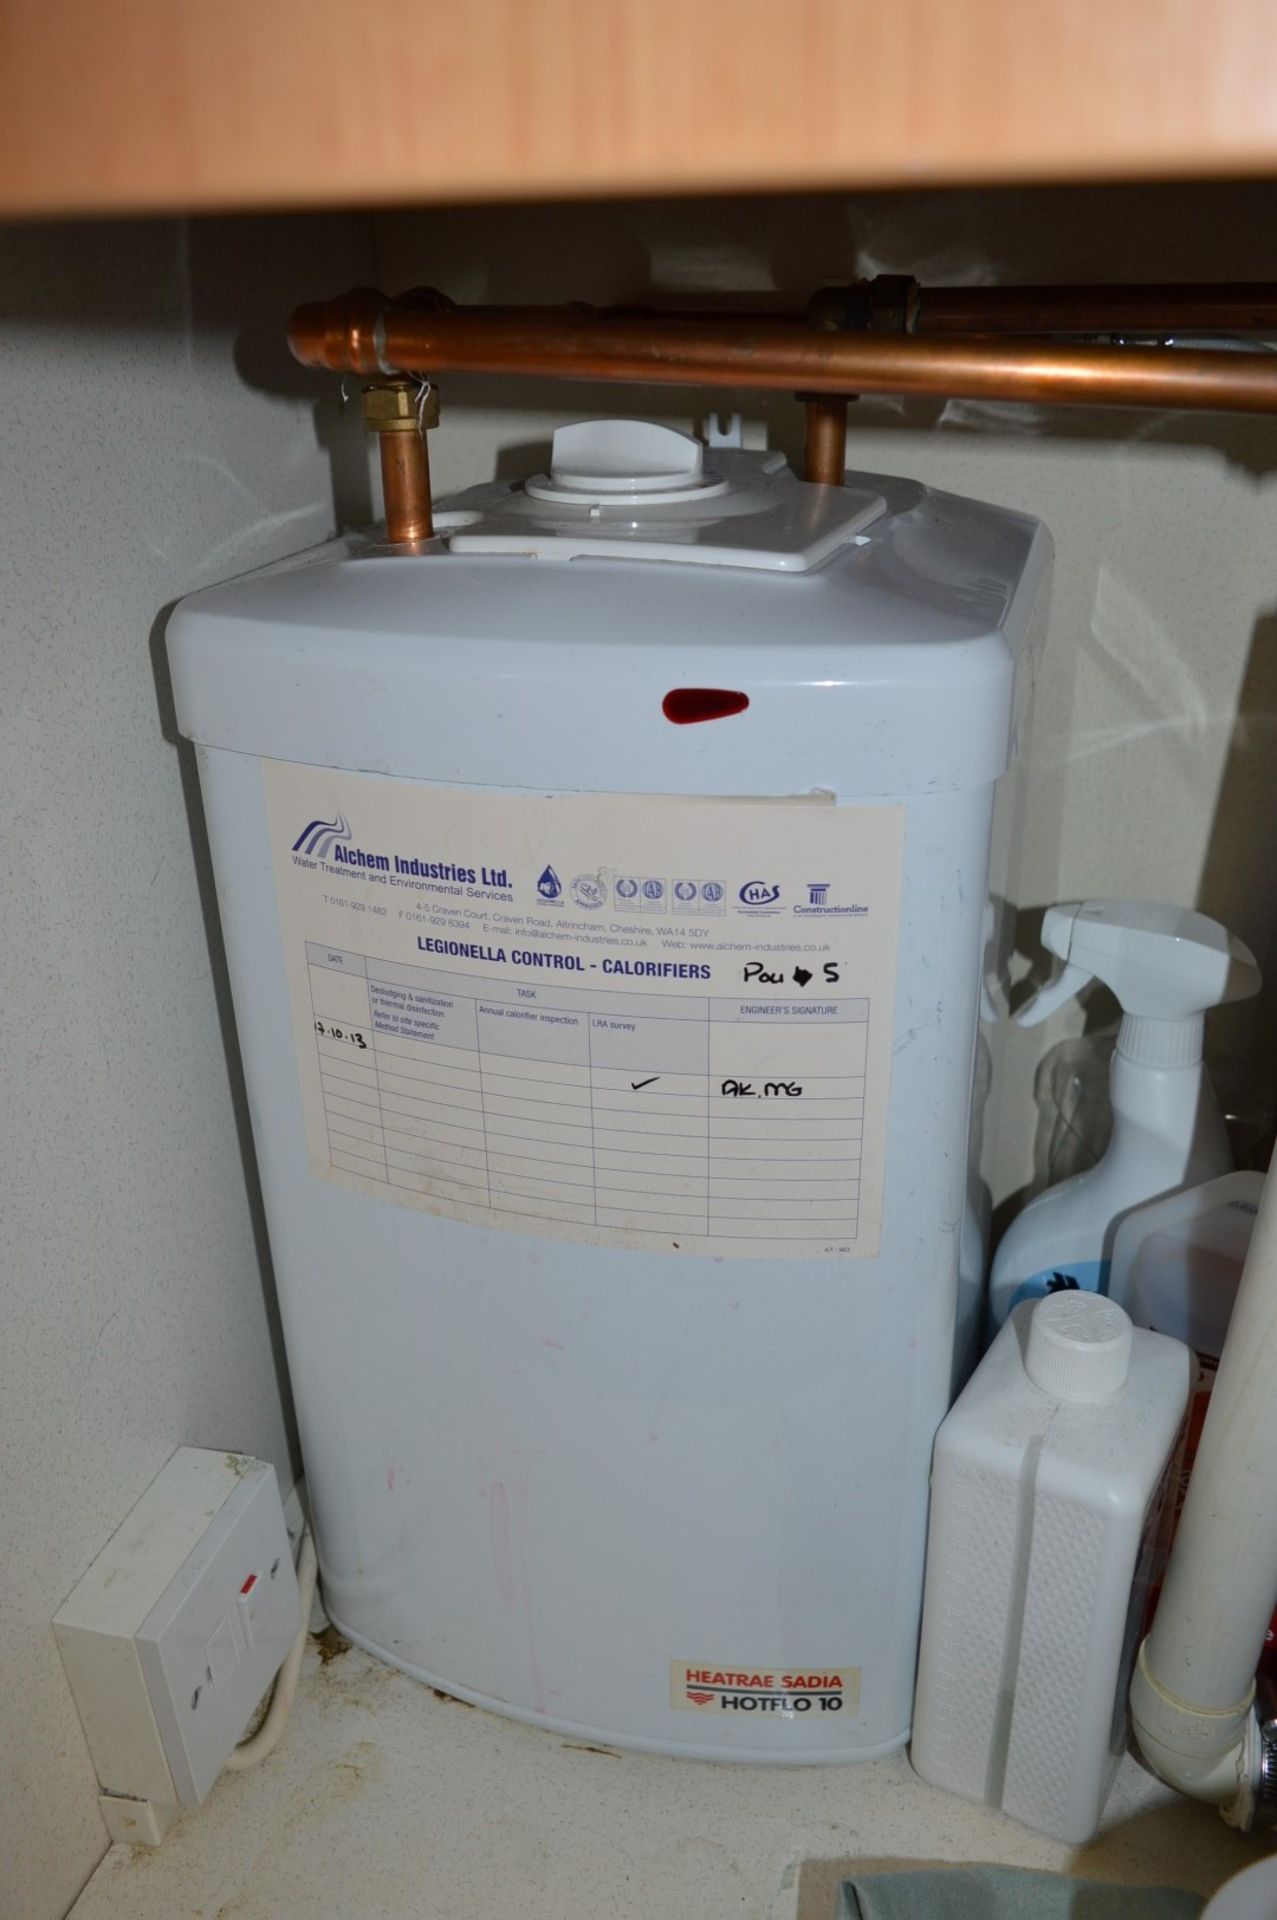 1 x Heatrae Sadia Hotflo 10 Electric Unvented Water Heater - CL400 - Already Removed Ready For